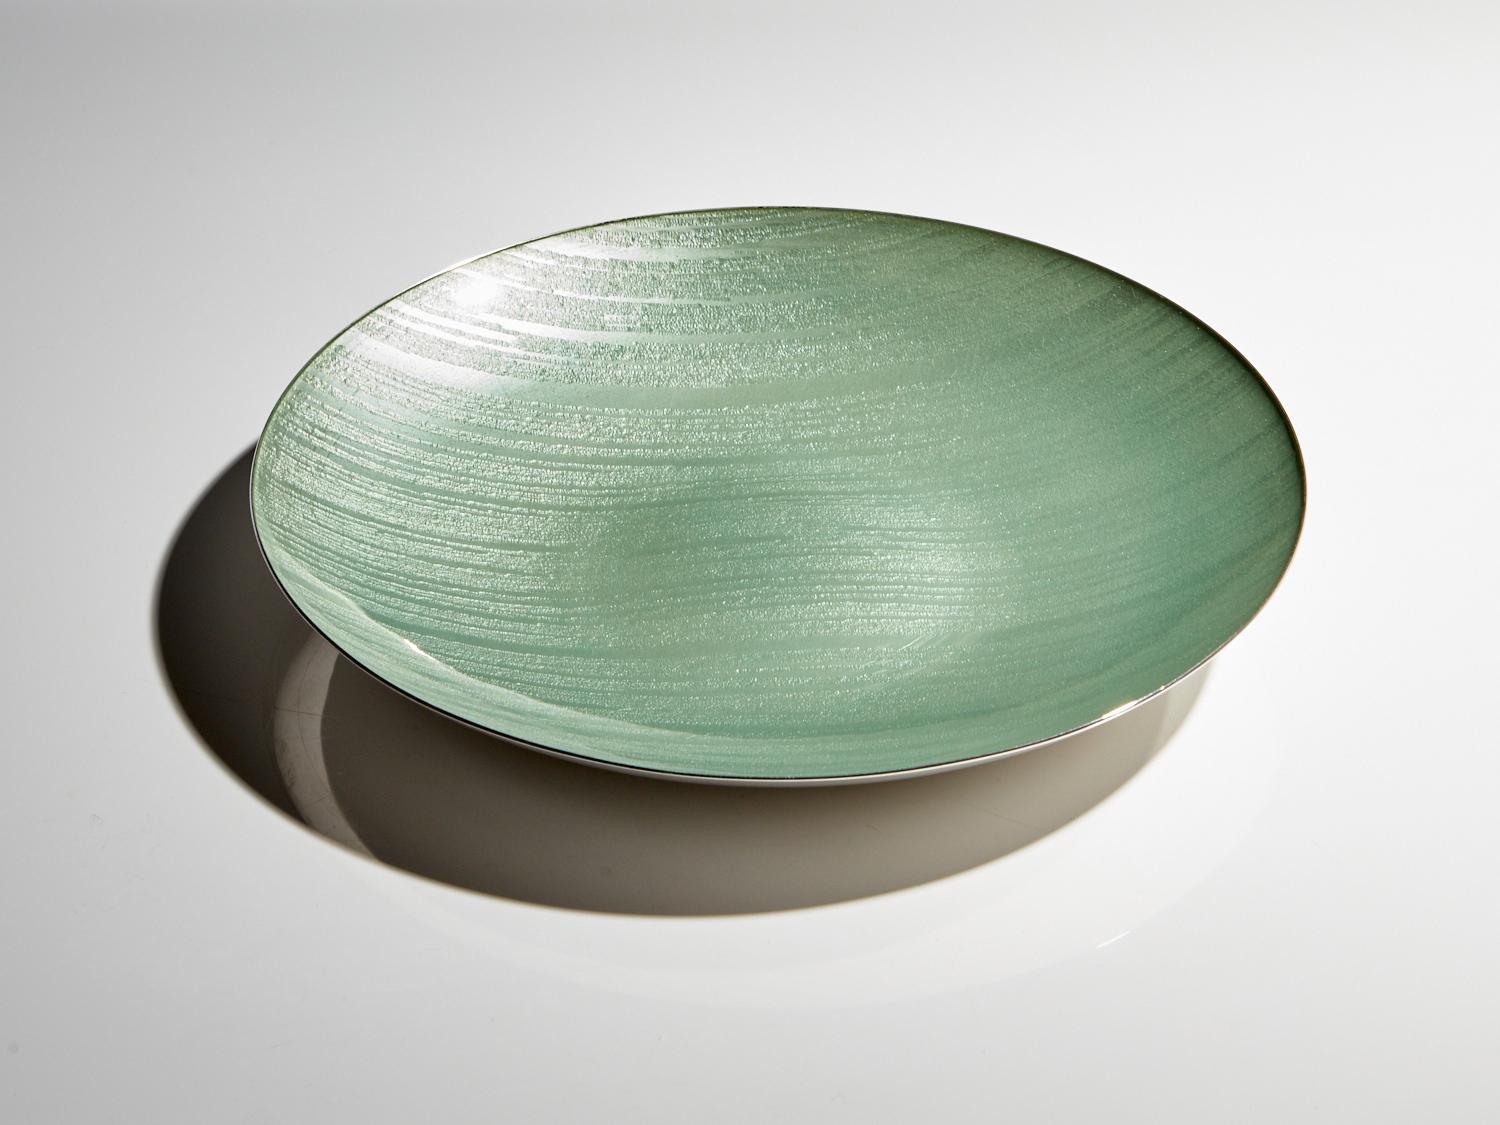 A stunning 20th century sterling silver and enamel bowl by Jacob Tostrup Date Circa 1955-60. 
This piece is a great example of quality, as with all Tostrup pieces. The bowl has a good gauge of sterling silver and the muted green enamel with under